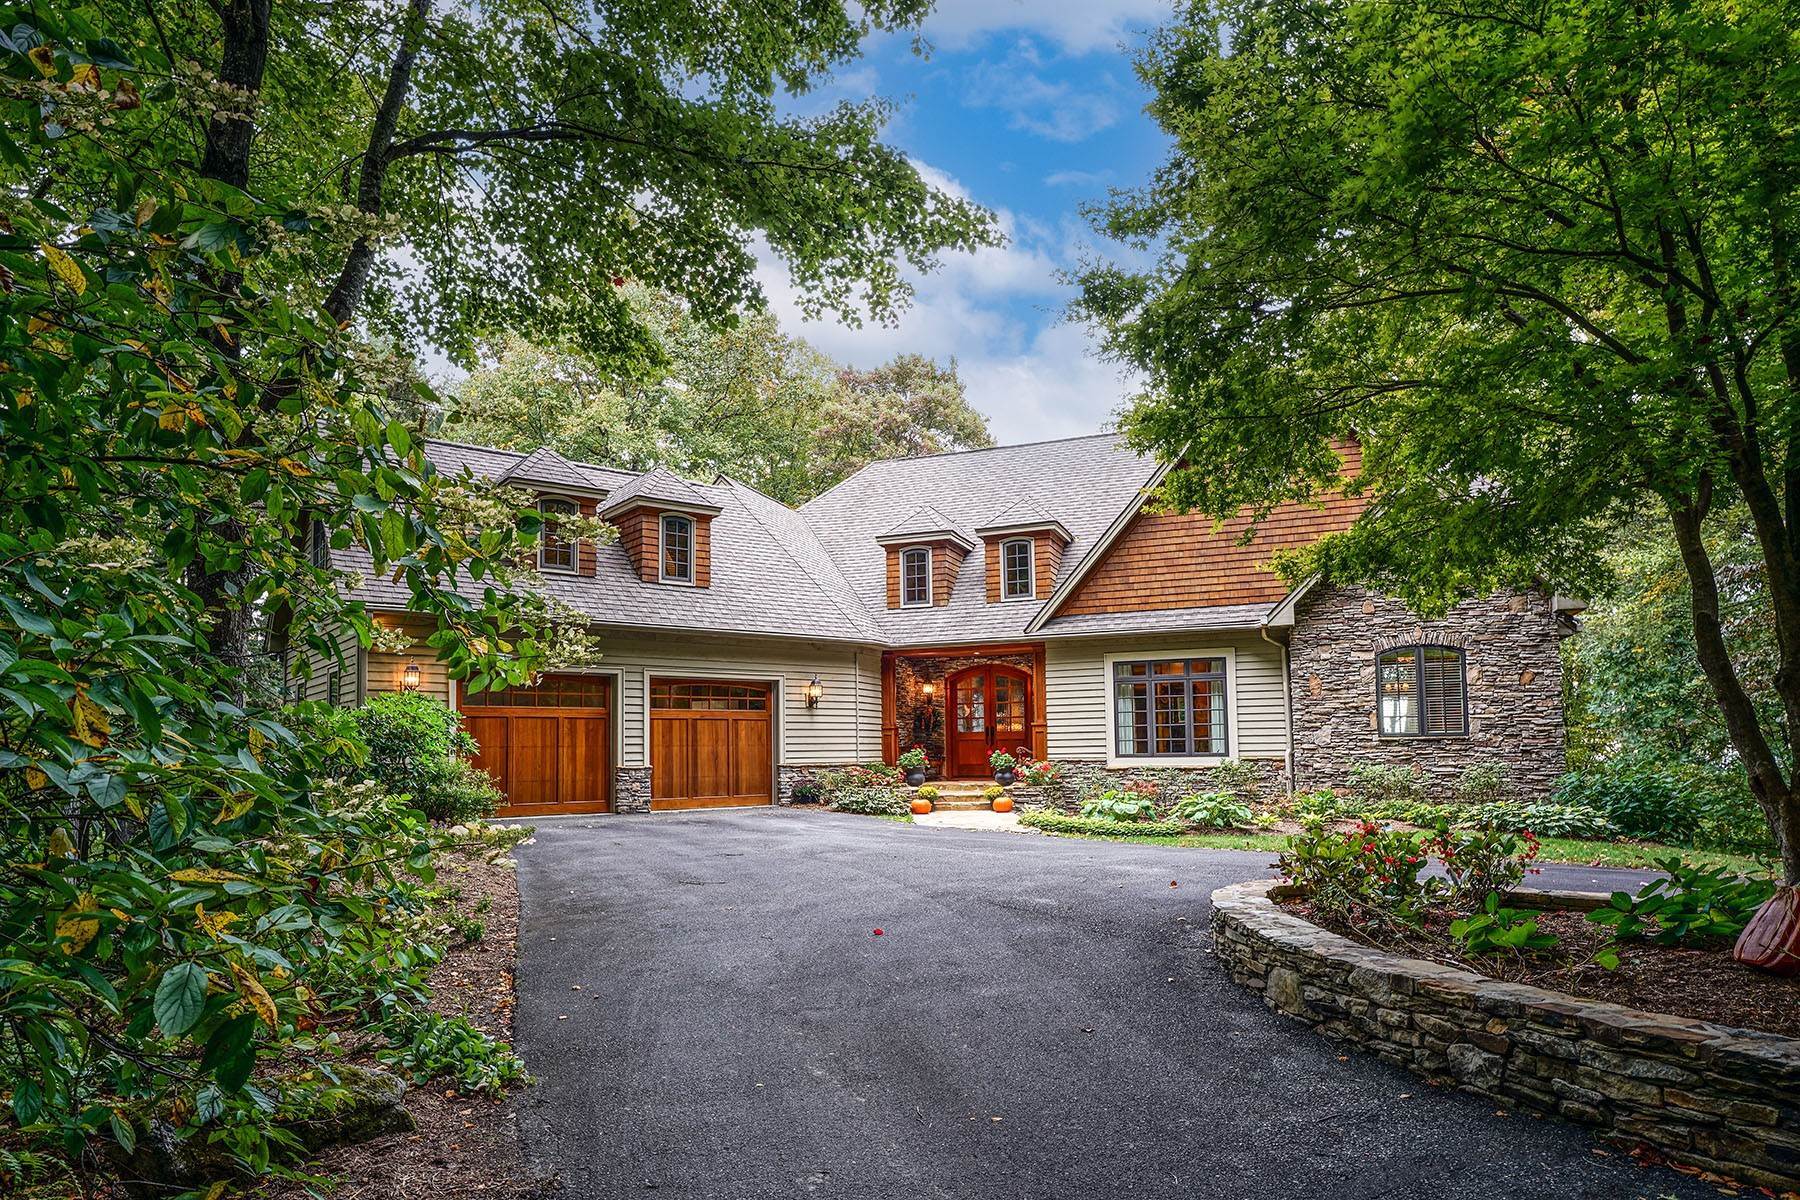 Single Family Homes for Sale at THE ORCHARDS OF MAYVIEW - BLOWING ROCK 847 Old Orchard Road Blowing Rock, North Carolina 28605 United States